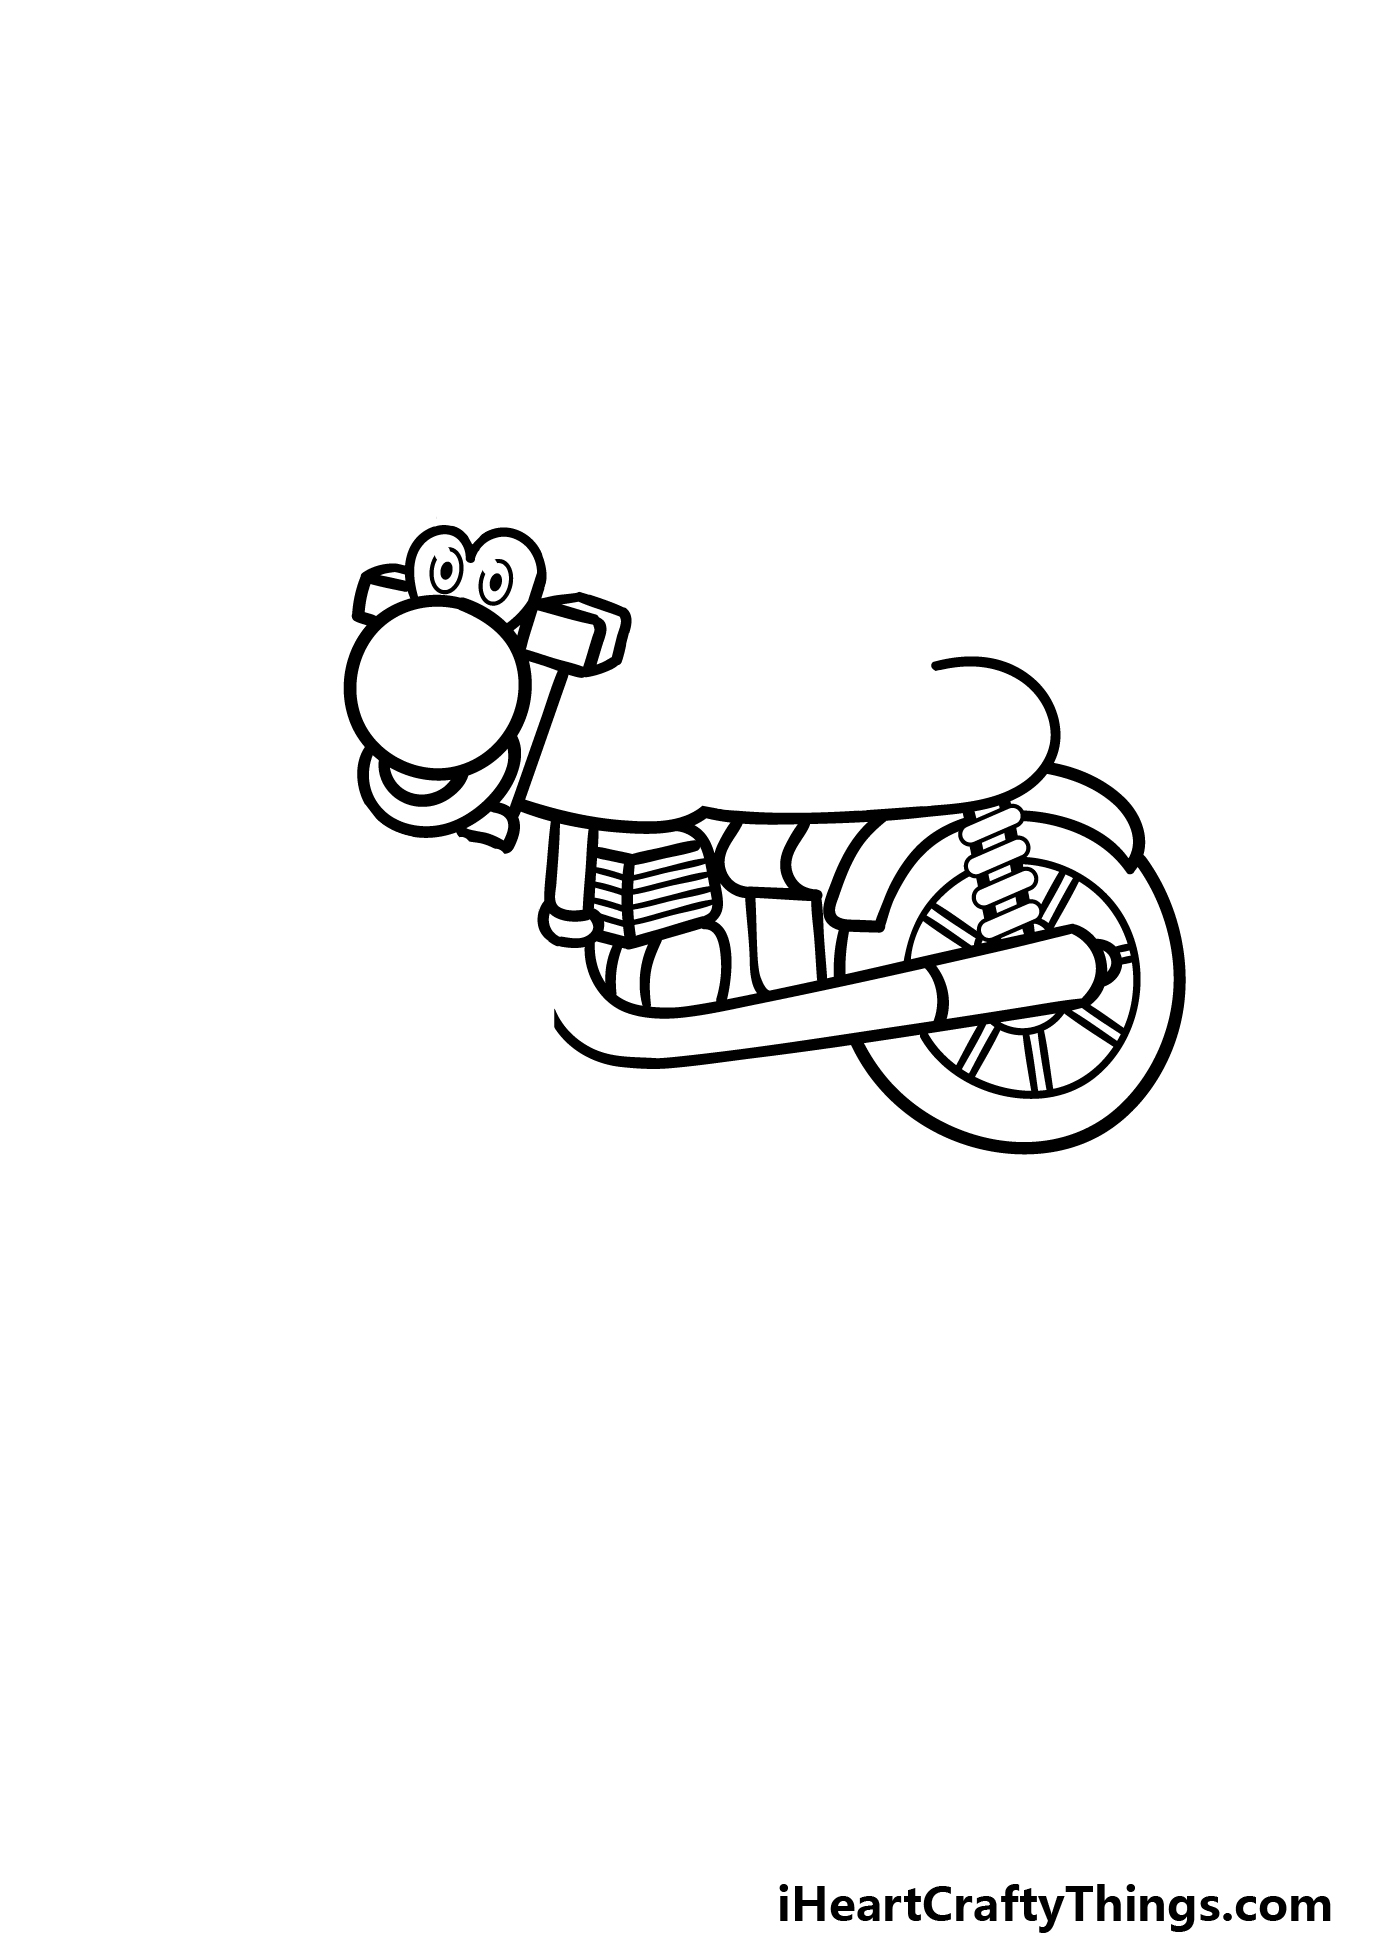 how to draw a cartoon motorcycle step 4